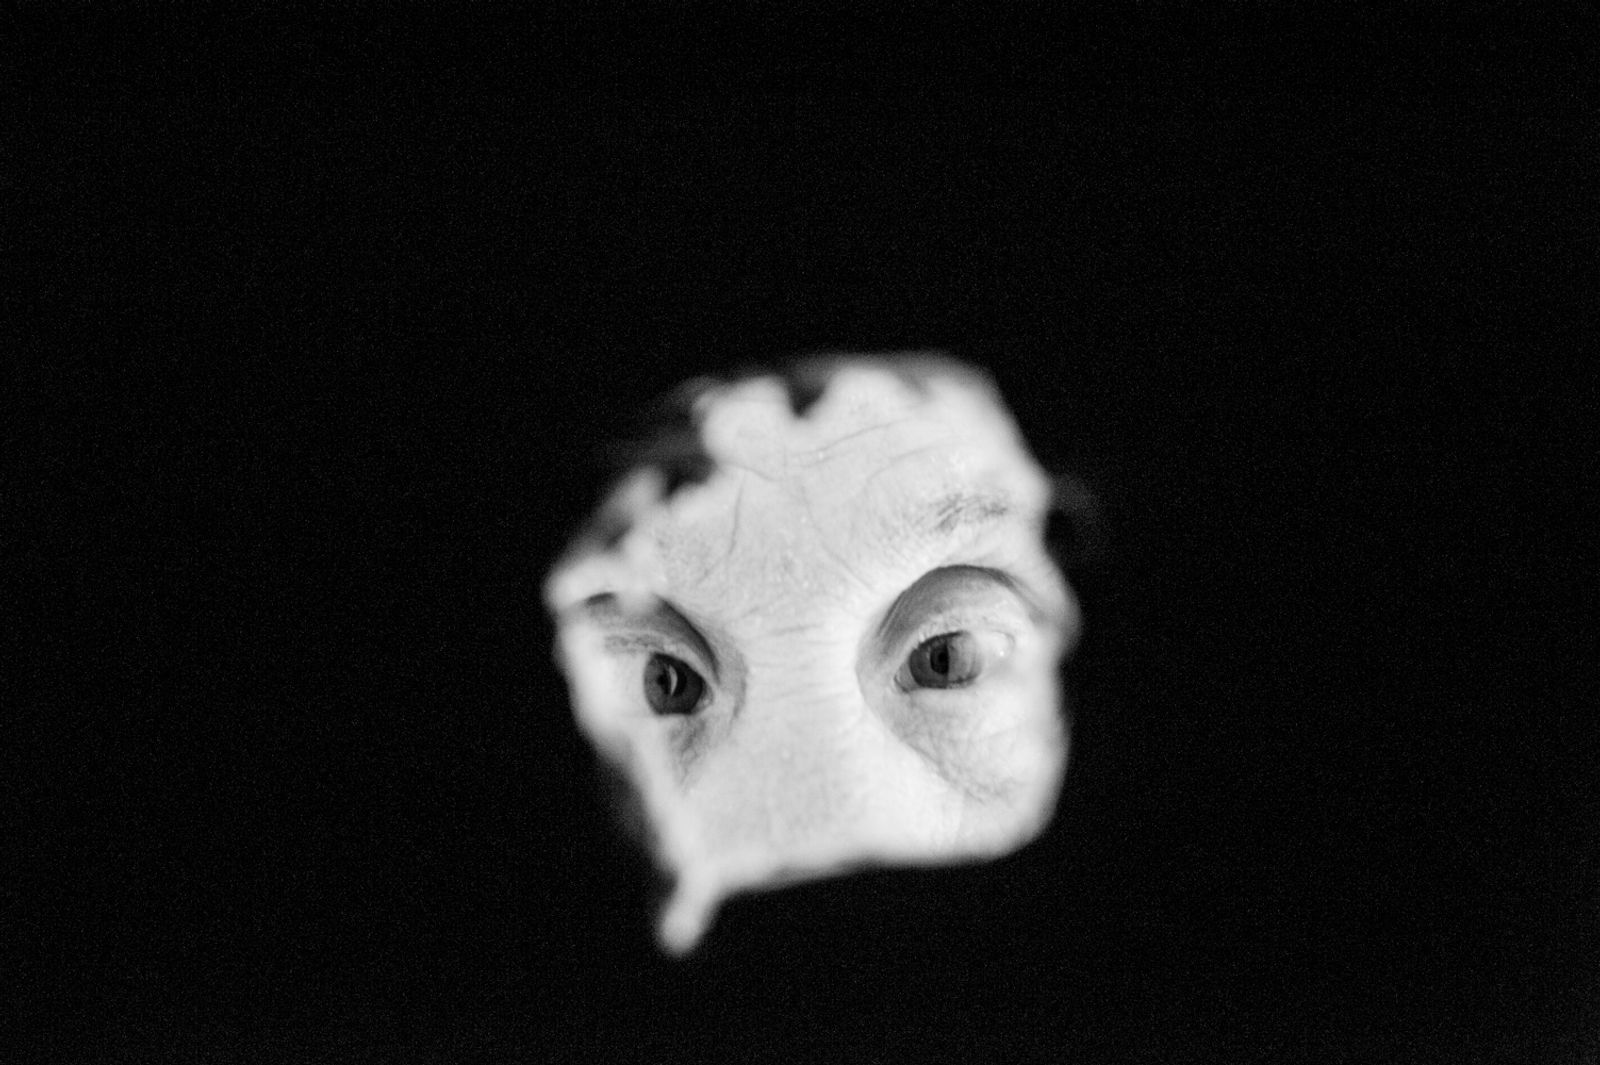 © Ilana Bar - The image is dark and in the center we see a hole where the eyes of someone with Down syndrome appear